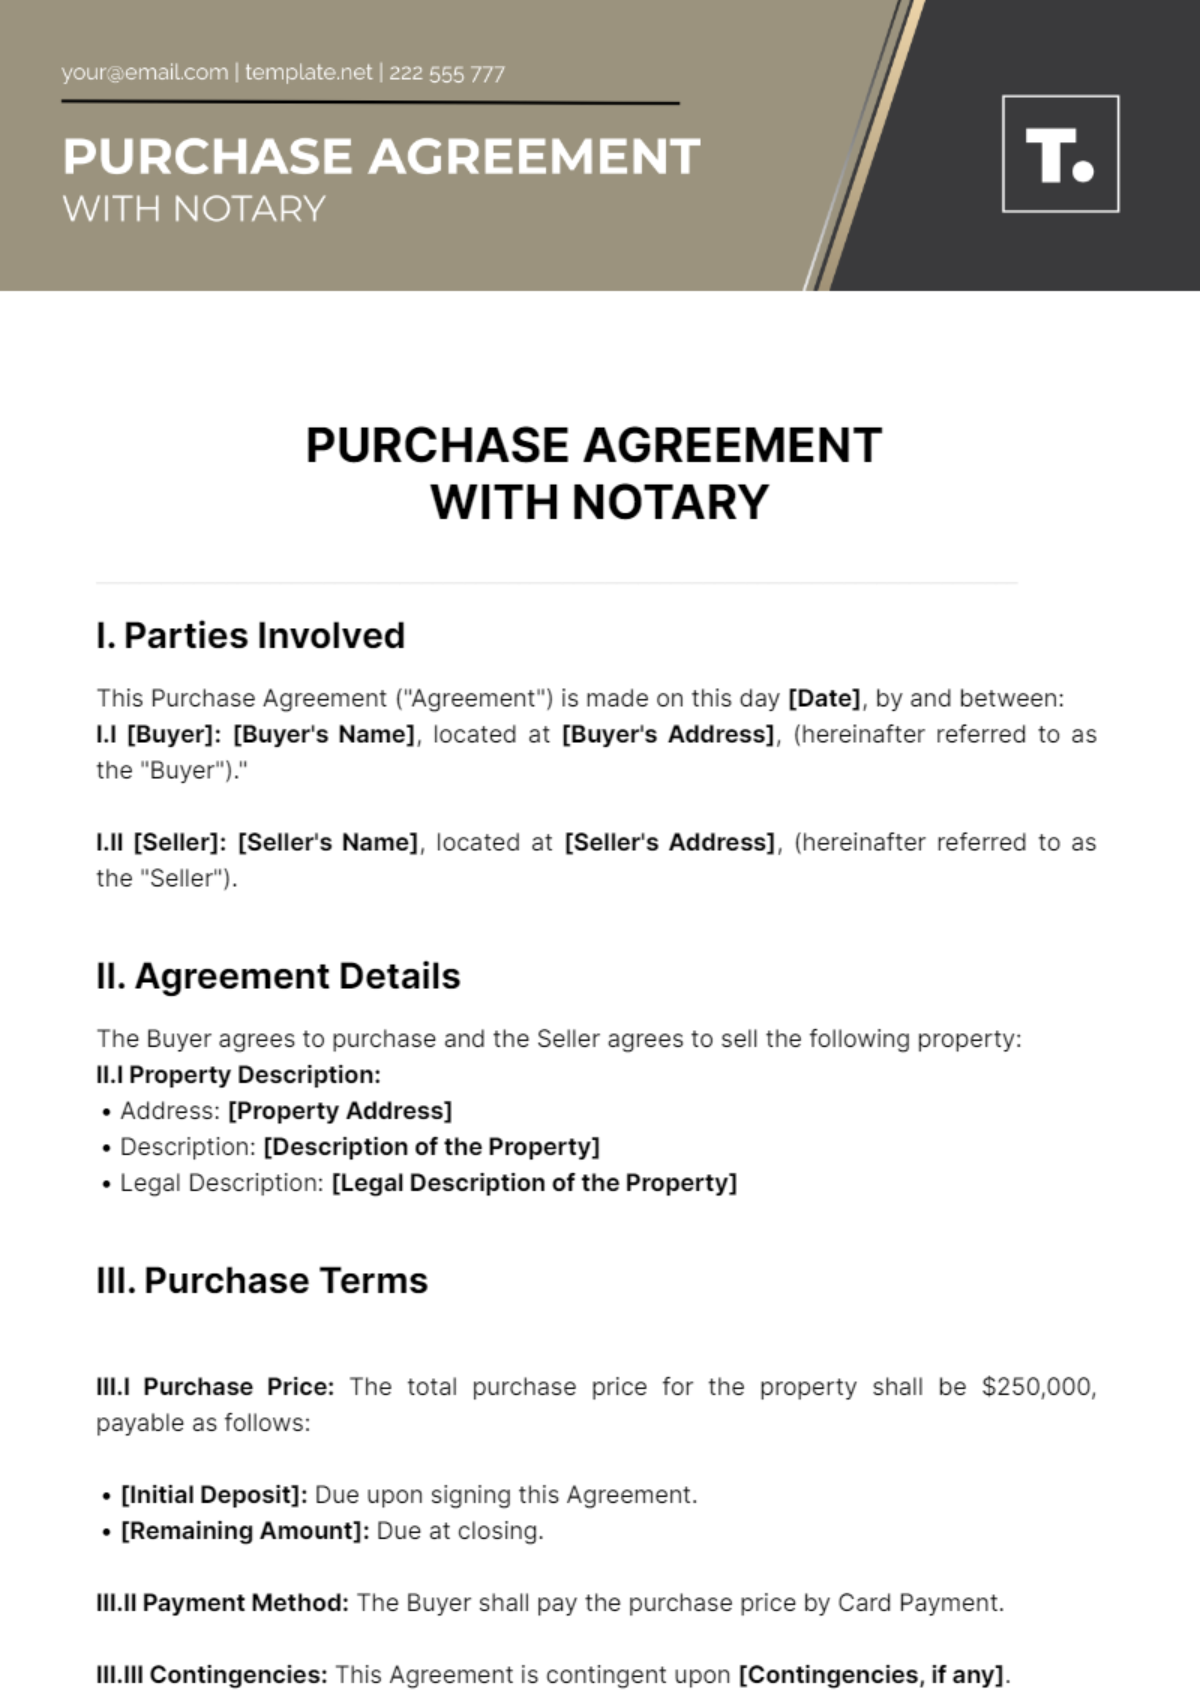 Free Purchase Agreement With Notary Template